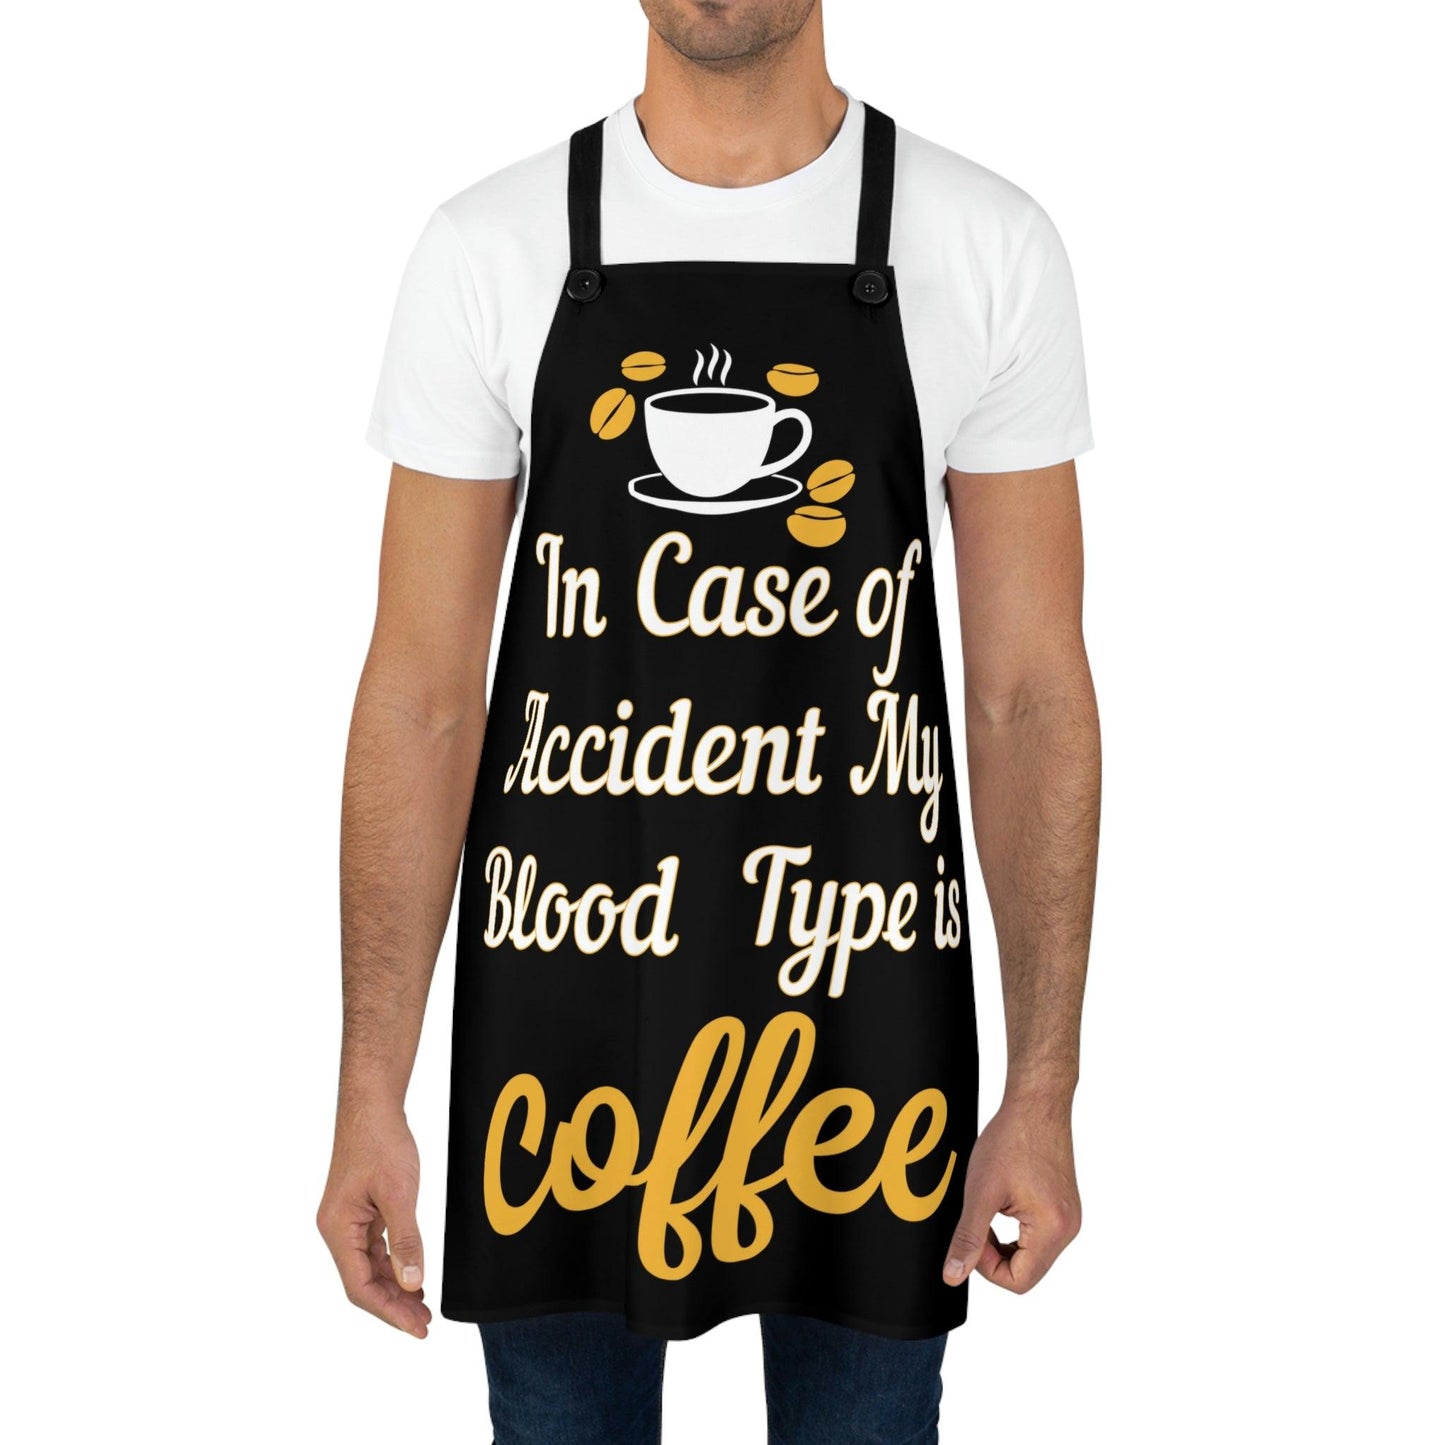 In case of accident my blood type is Coffee Apron